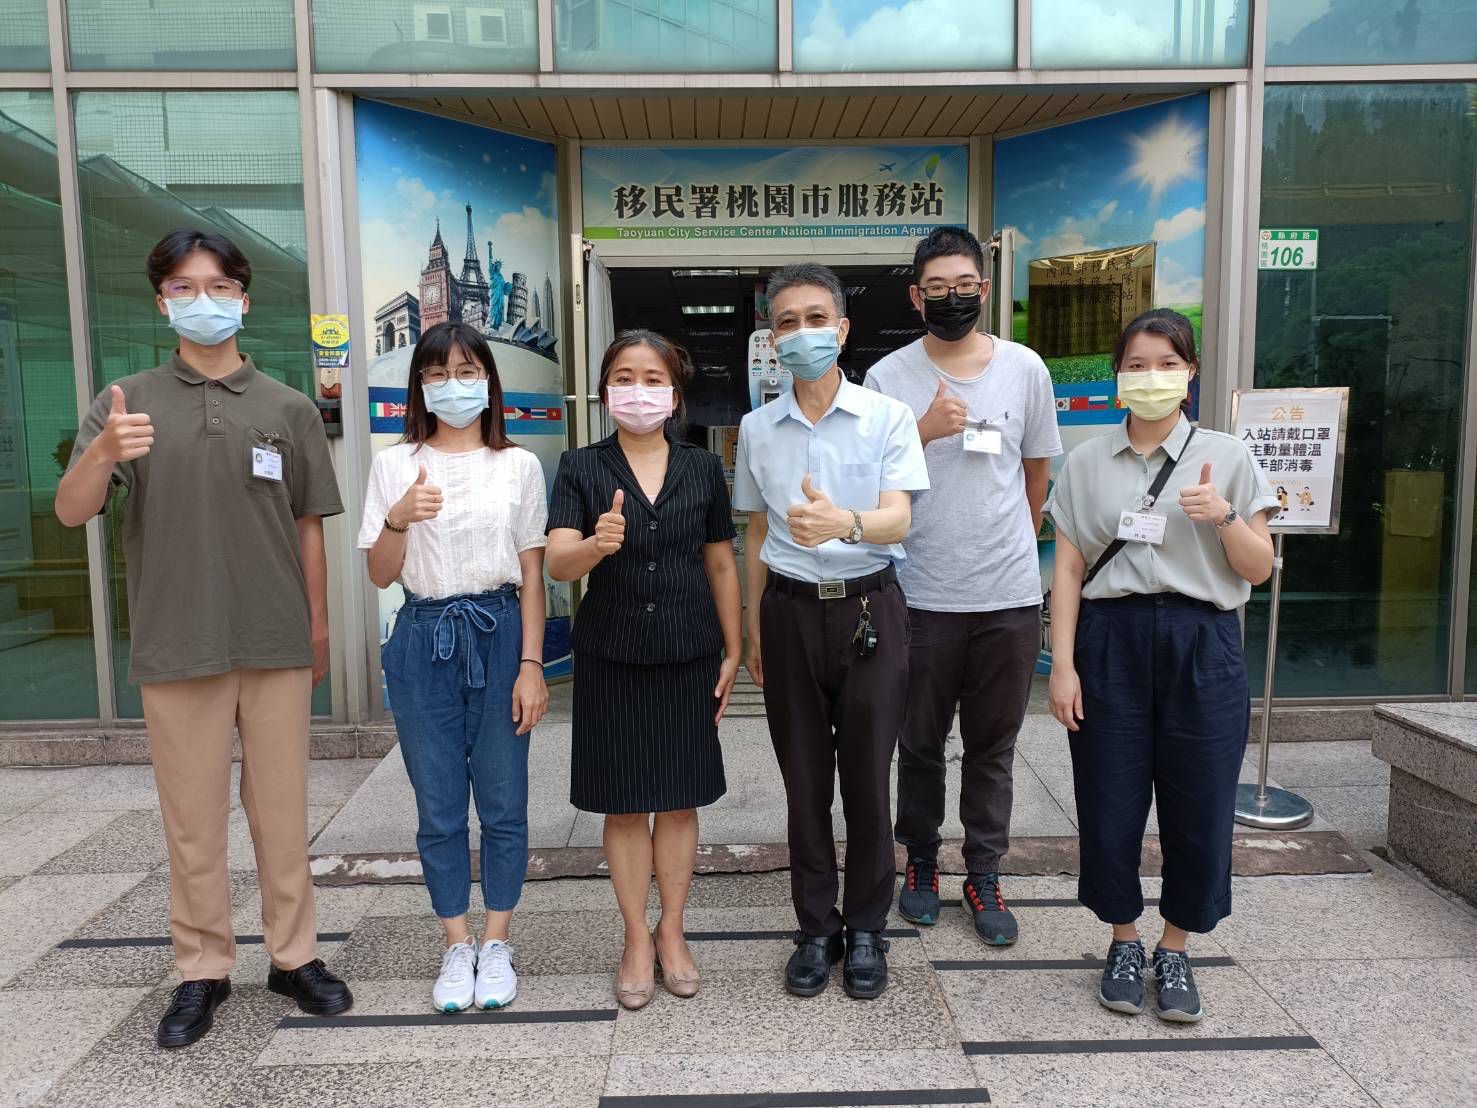 Director of Taoyuan City Service Station, Ying-Gui Huang (Left three), Professor from Department of Criminal Justice of Ming Chuan University, Zan-Song Huang, and his students. (Left four)  Photo Credit/ Taoyuan Service Center